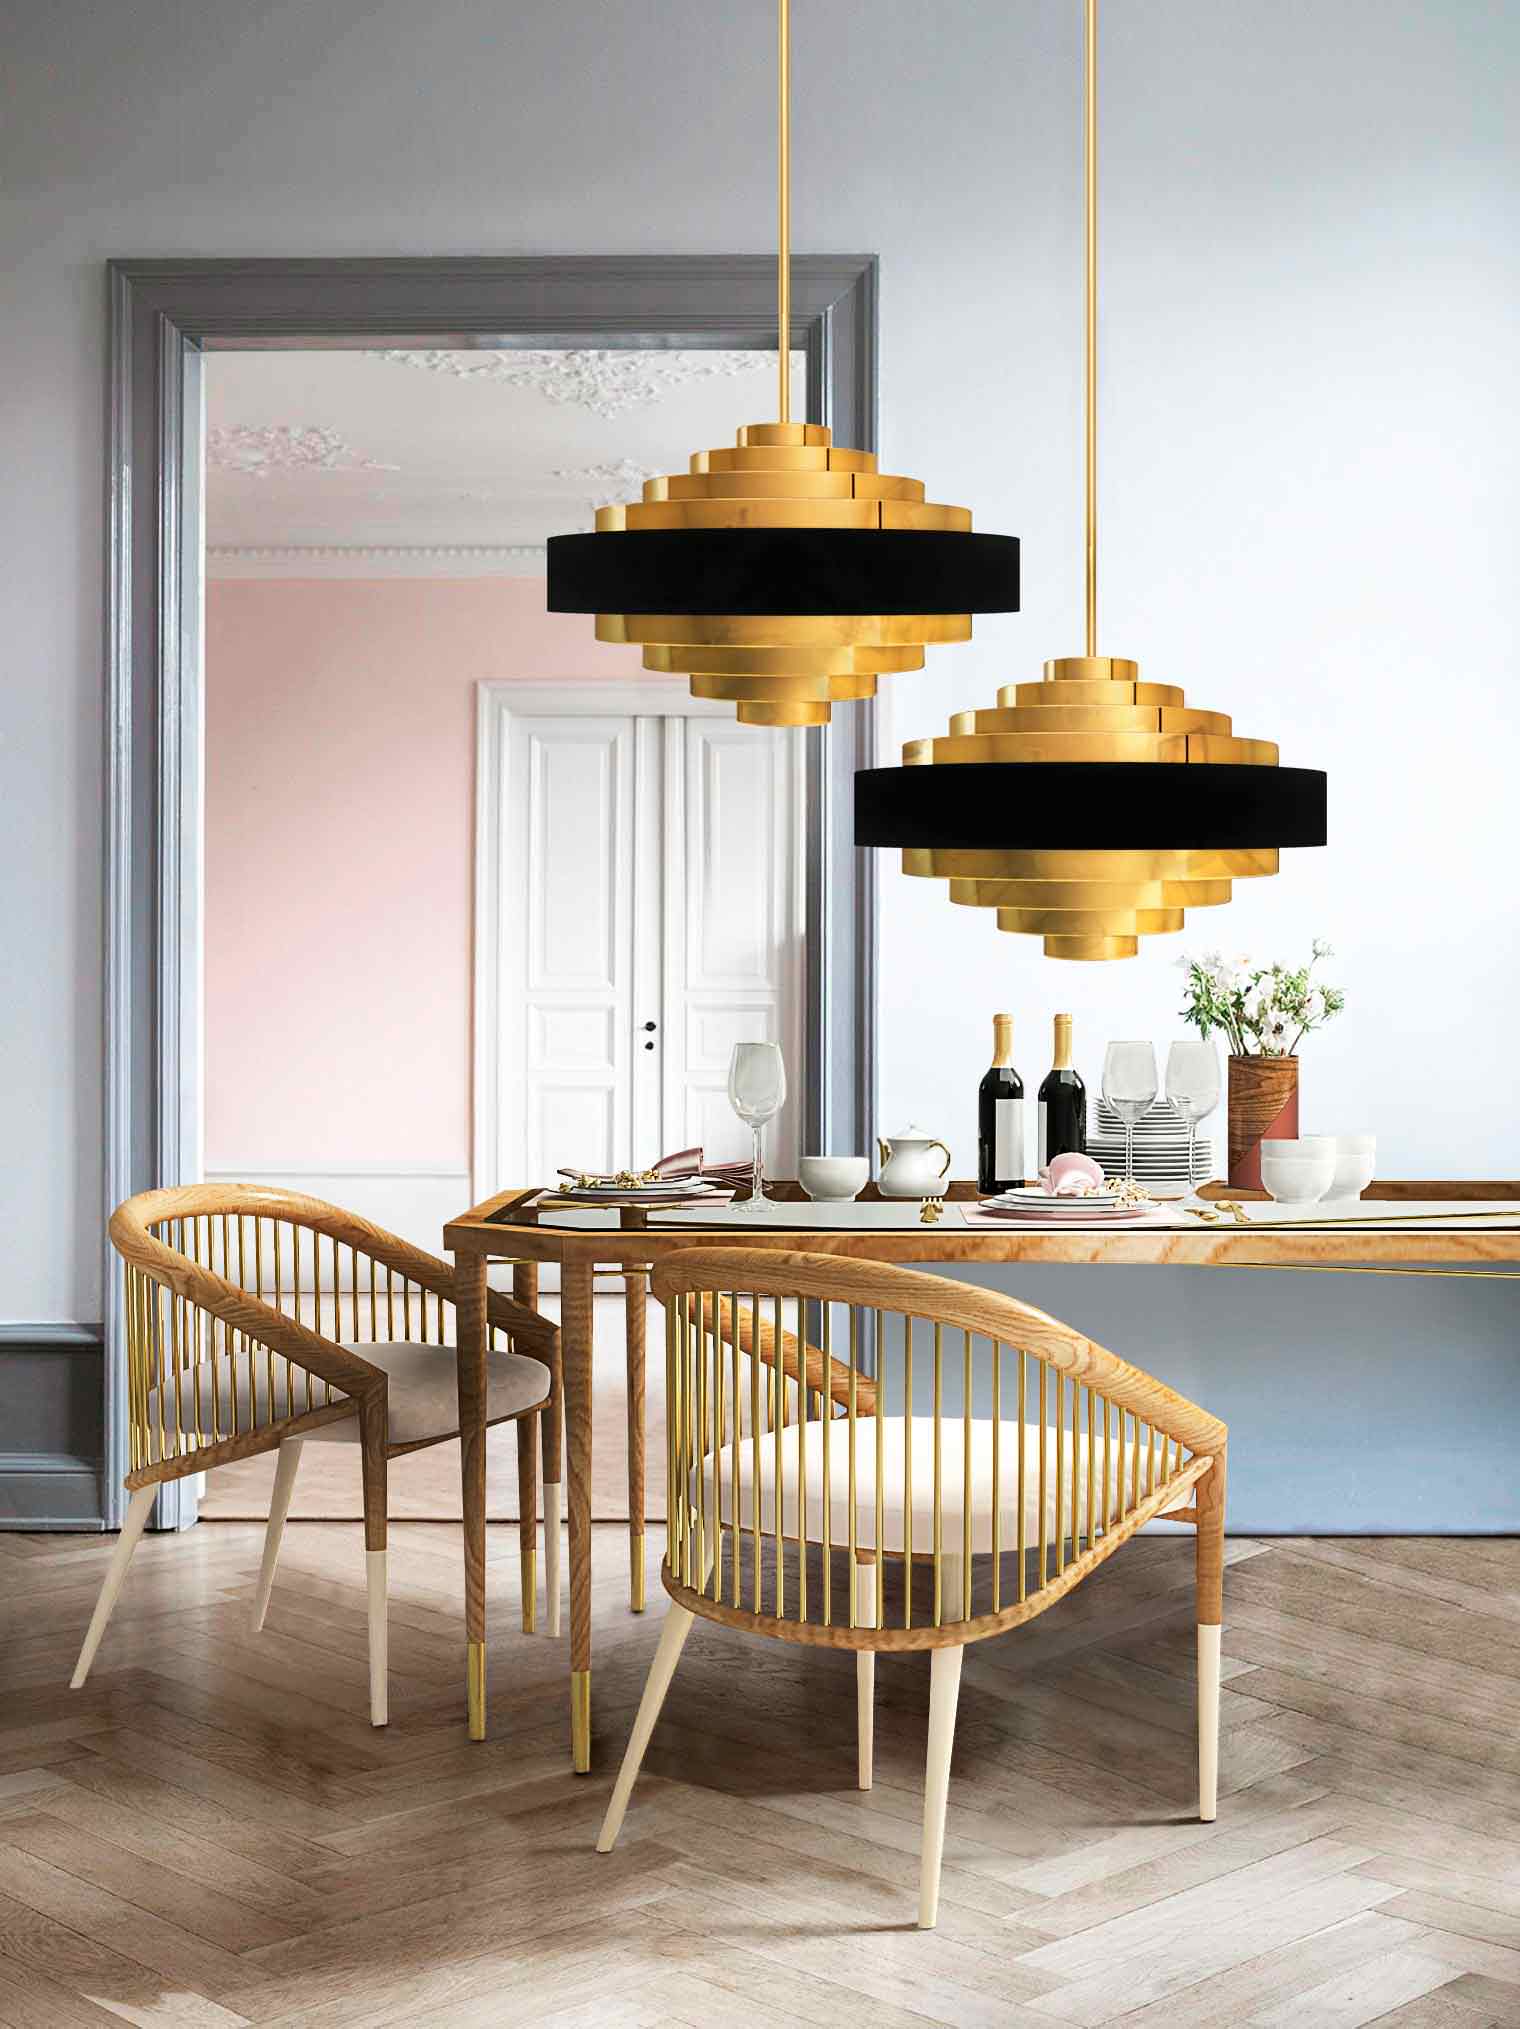 The polished brass tubes add a refined and sophisticated look to this design chair. Perfect for an elegant dining room.